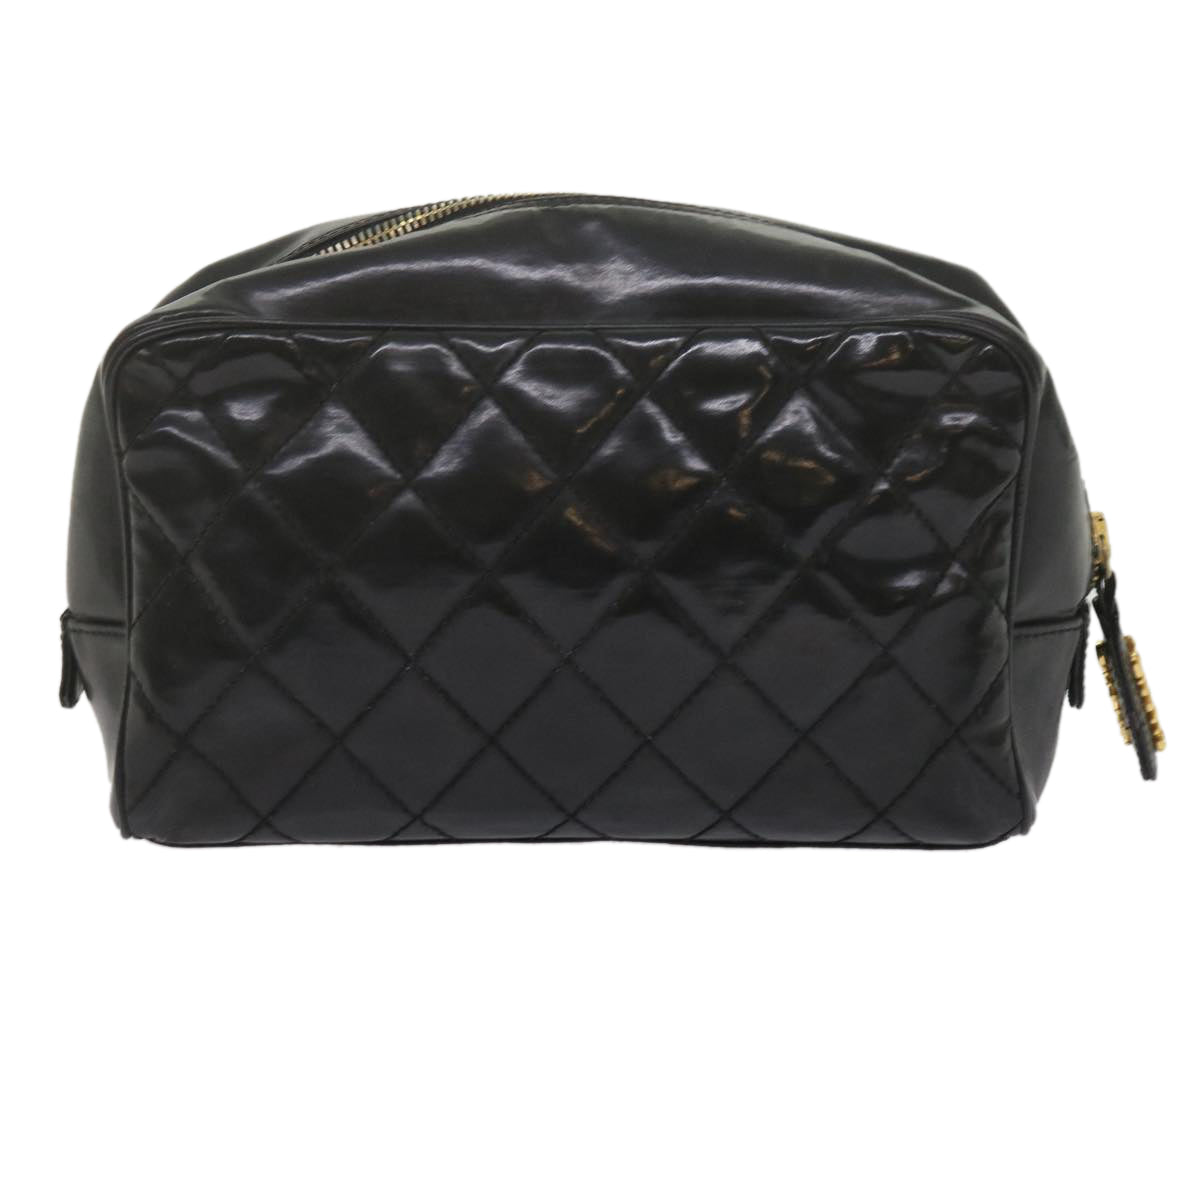 CHANEL Clutch Bag Patent leather Black CC Auth bs11009 - 0